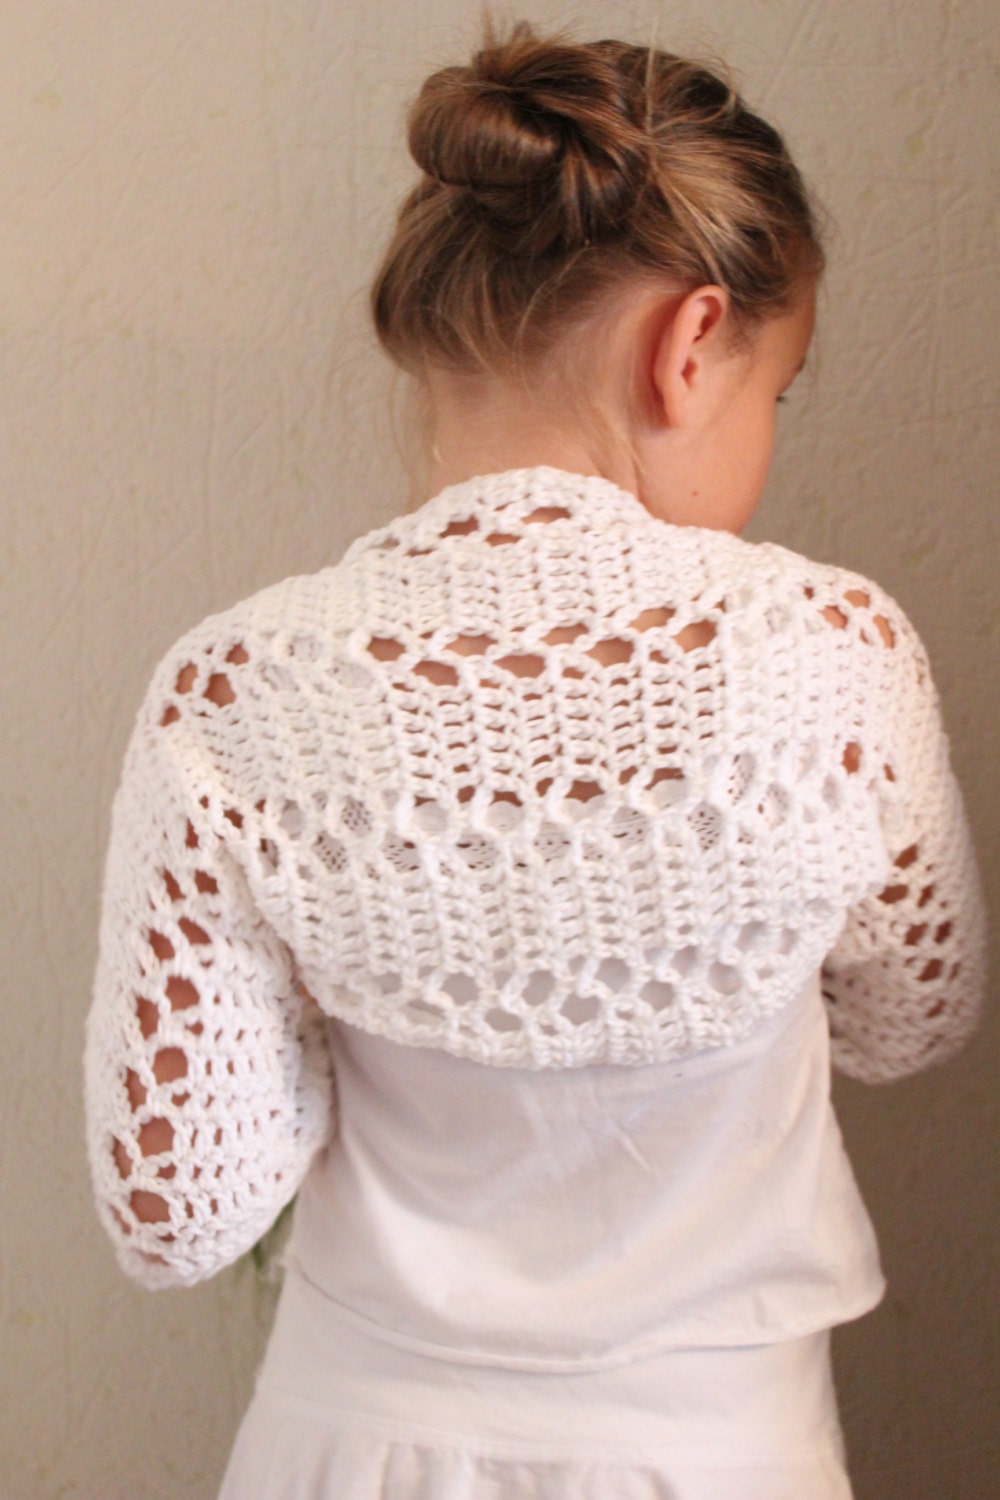 Crochet pattern - White Lace Shrug 1 - 10years - Listing52 from ...